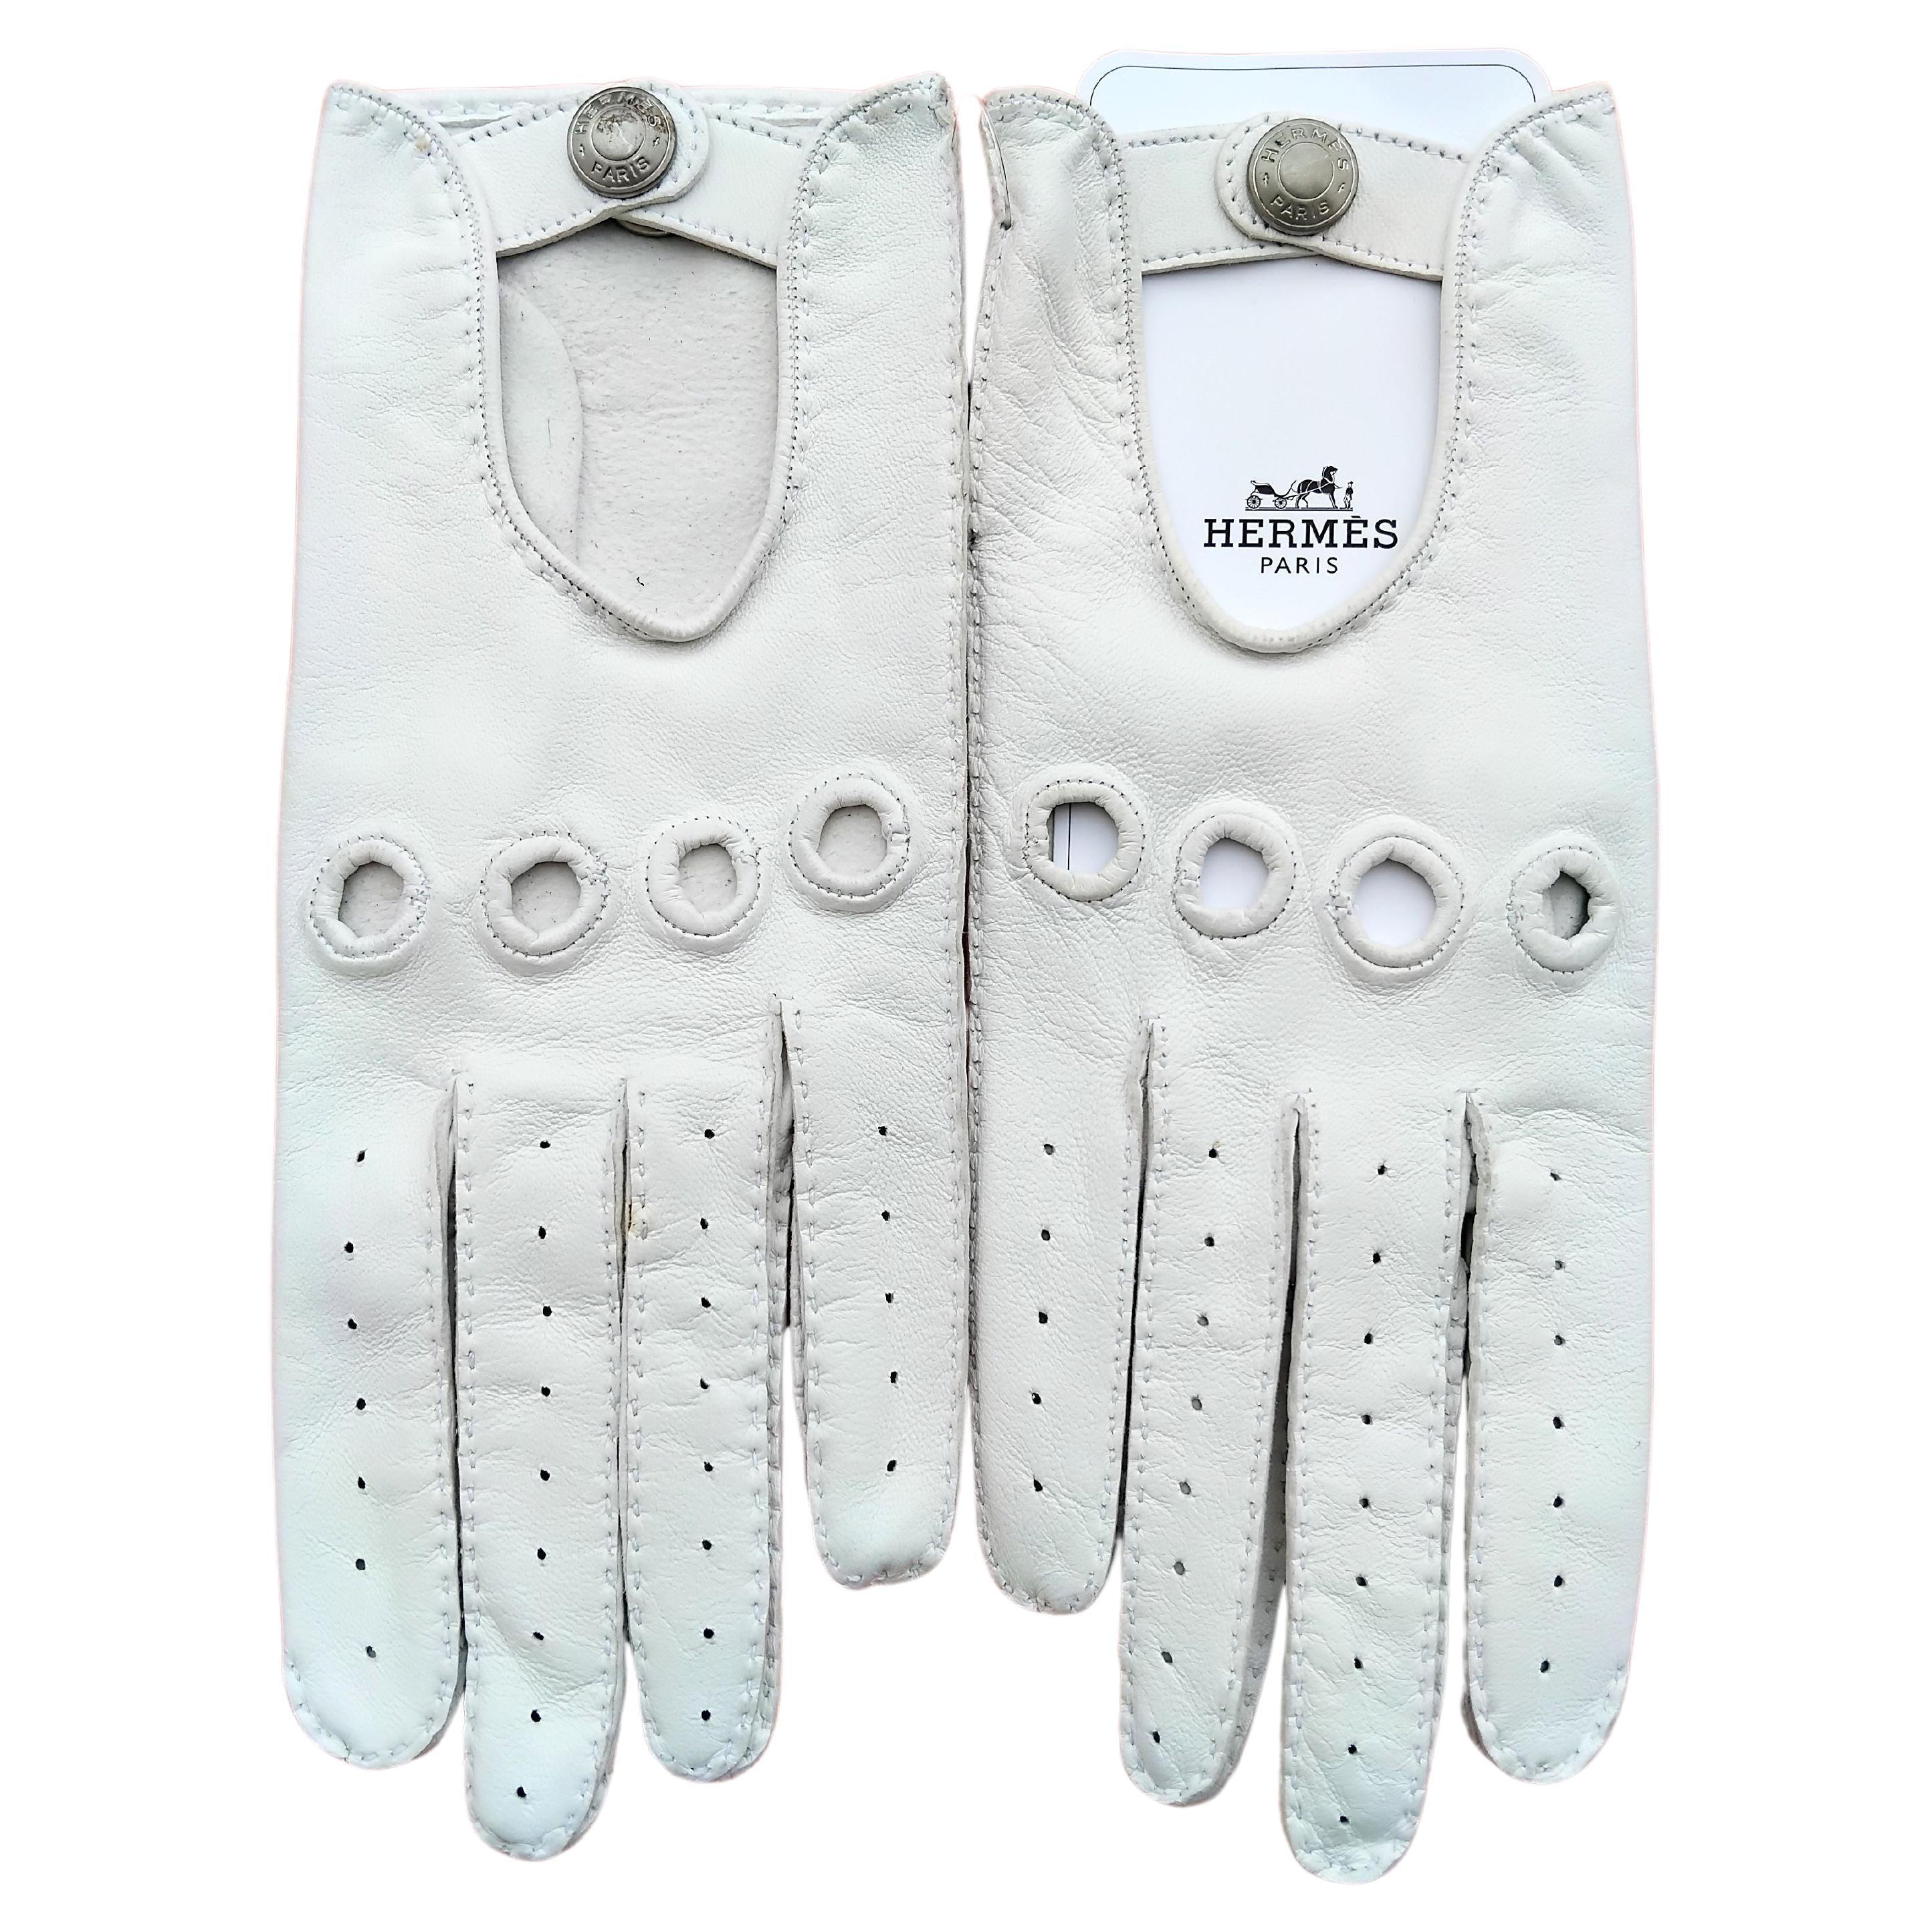 Exceptional Hermès Driving Gloves White Leather Size 7